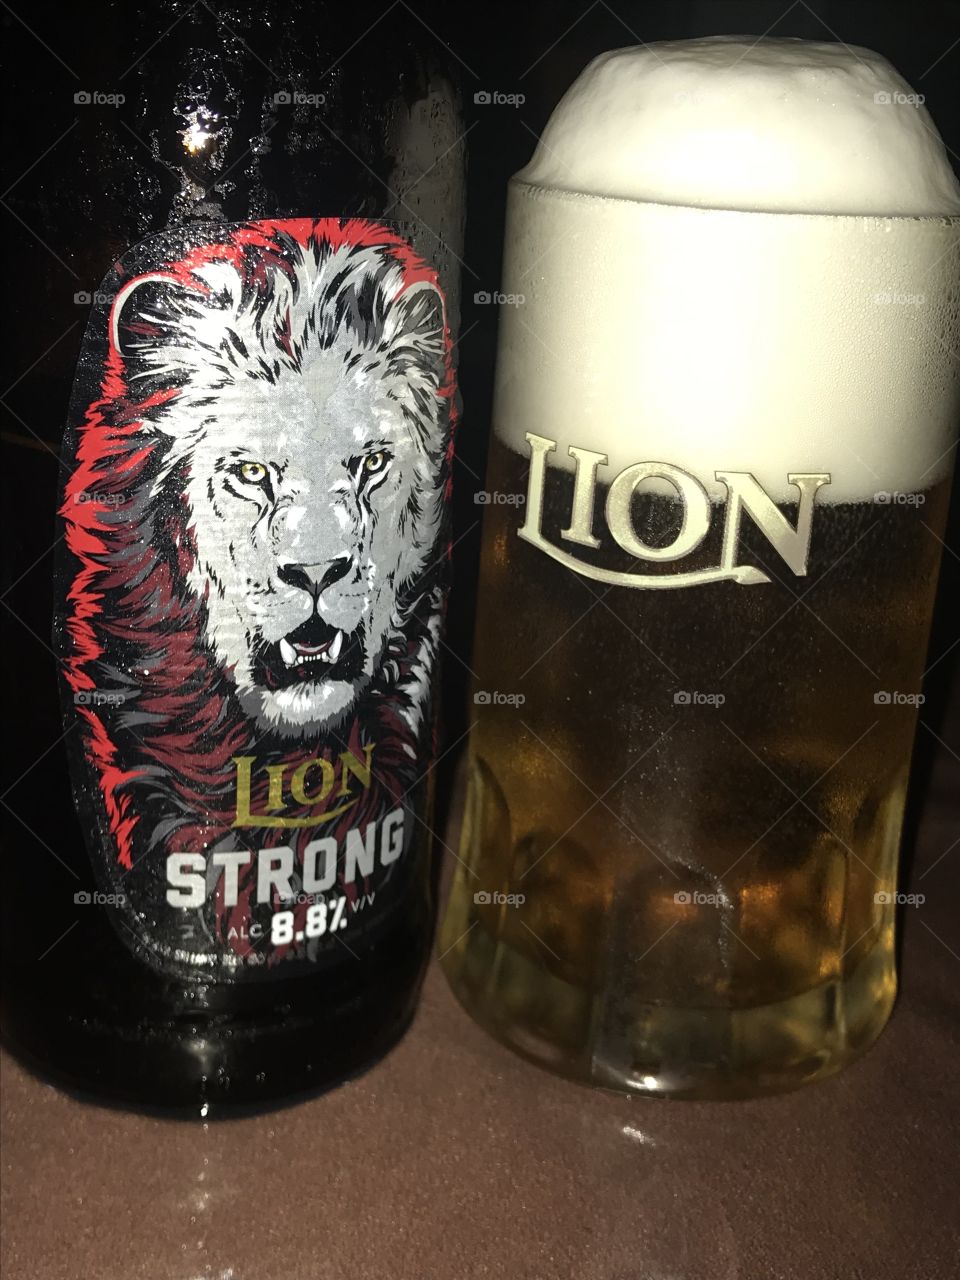 Fun with Lion beer